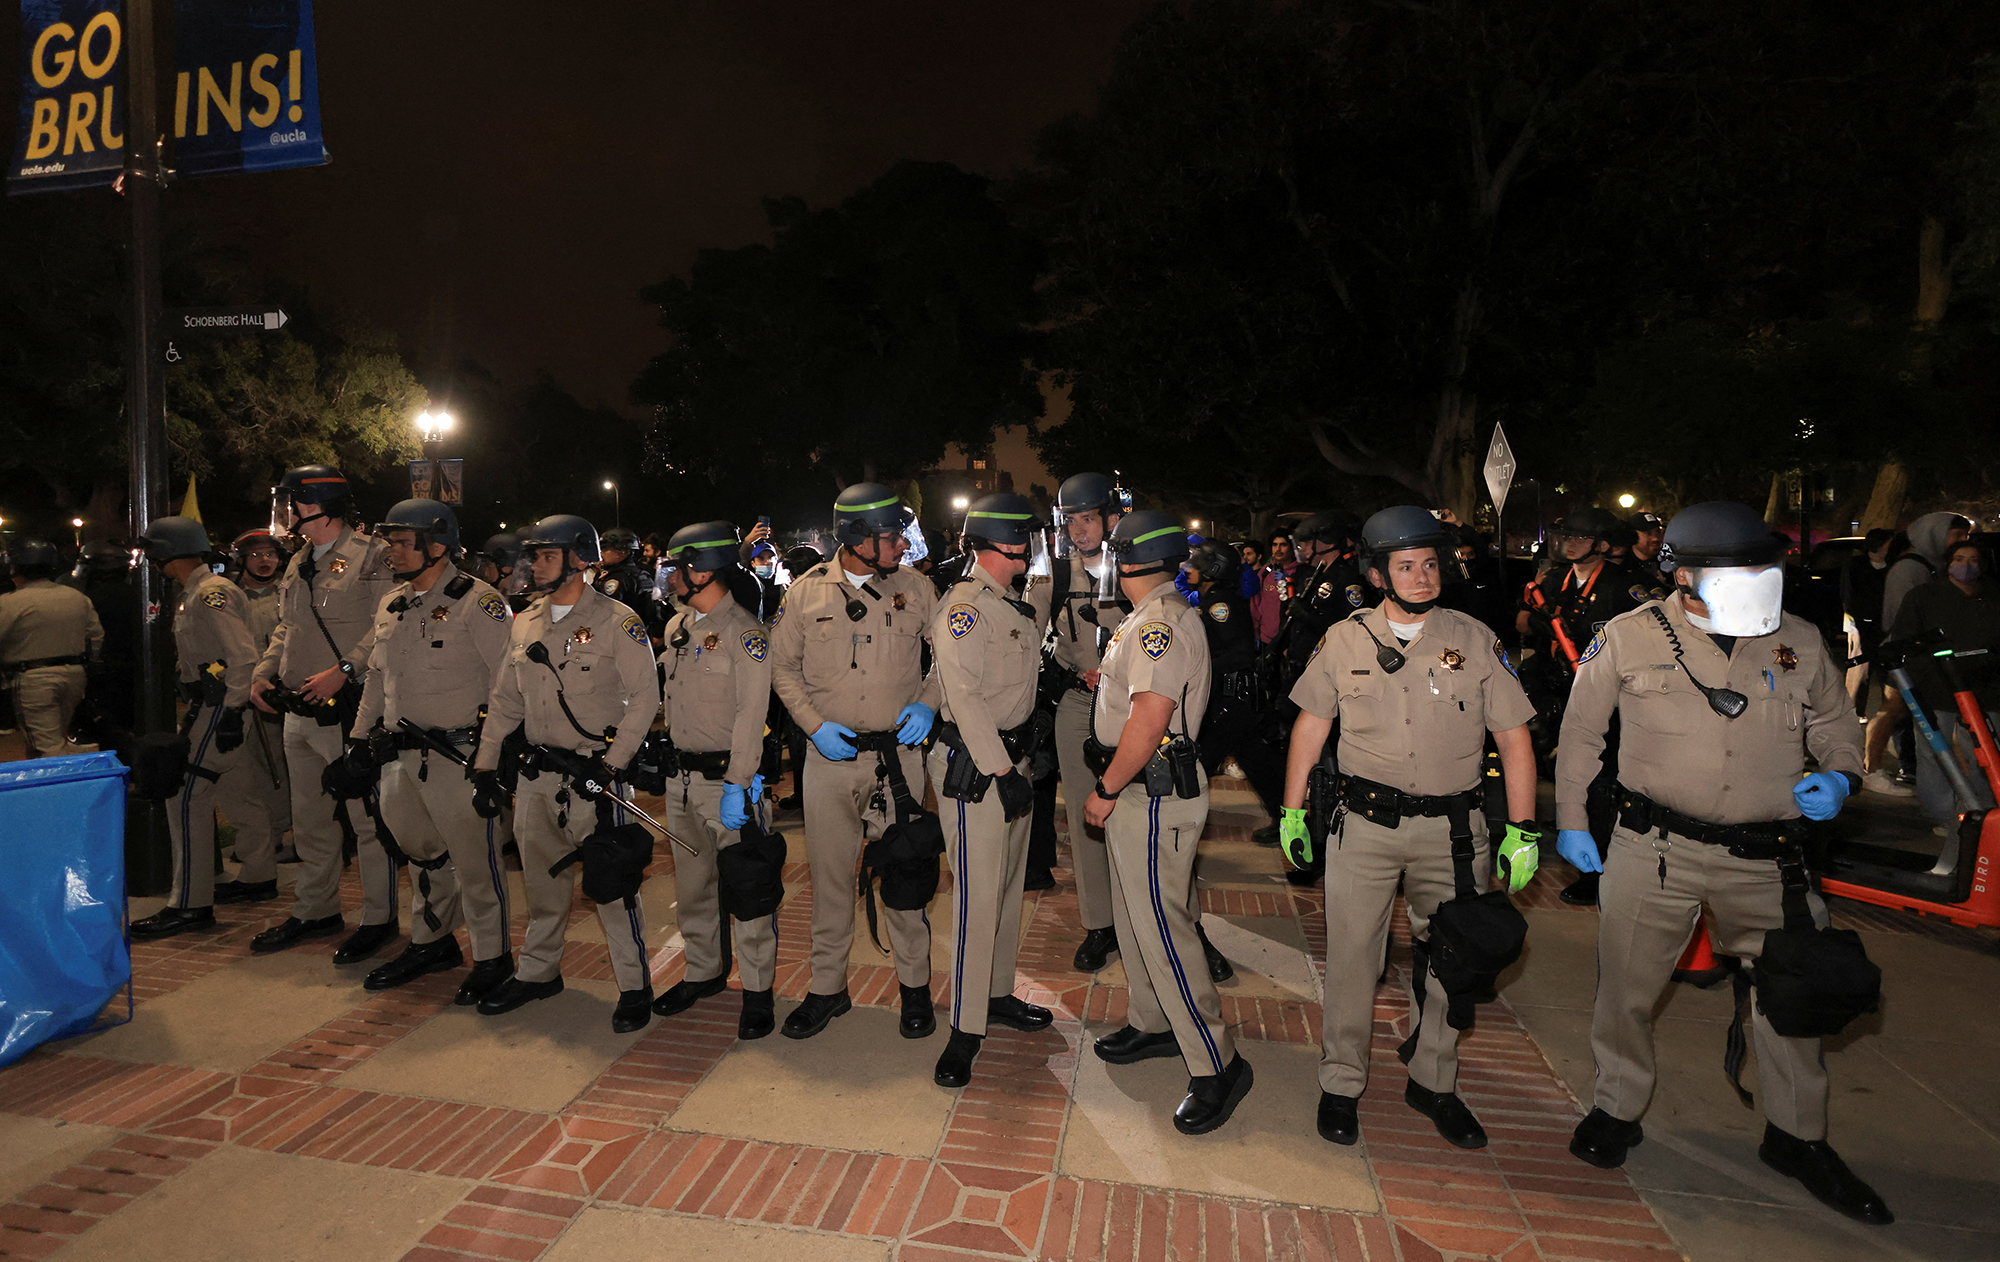 California Highway Patrol officers line up as counter-protesters clash with protesters in support of Palestinians in Gaza at an encampment on the campus of the University of California, Los Angeles (UCLA) on May 1.